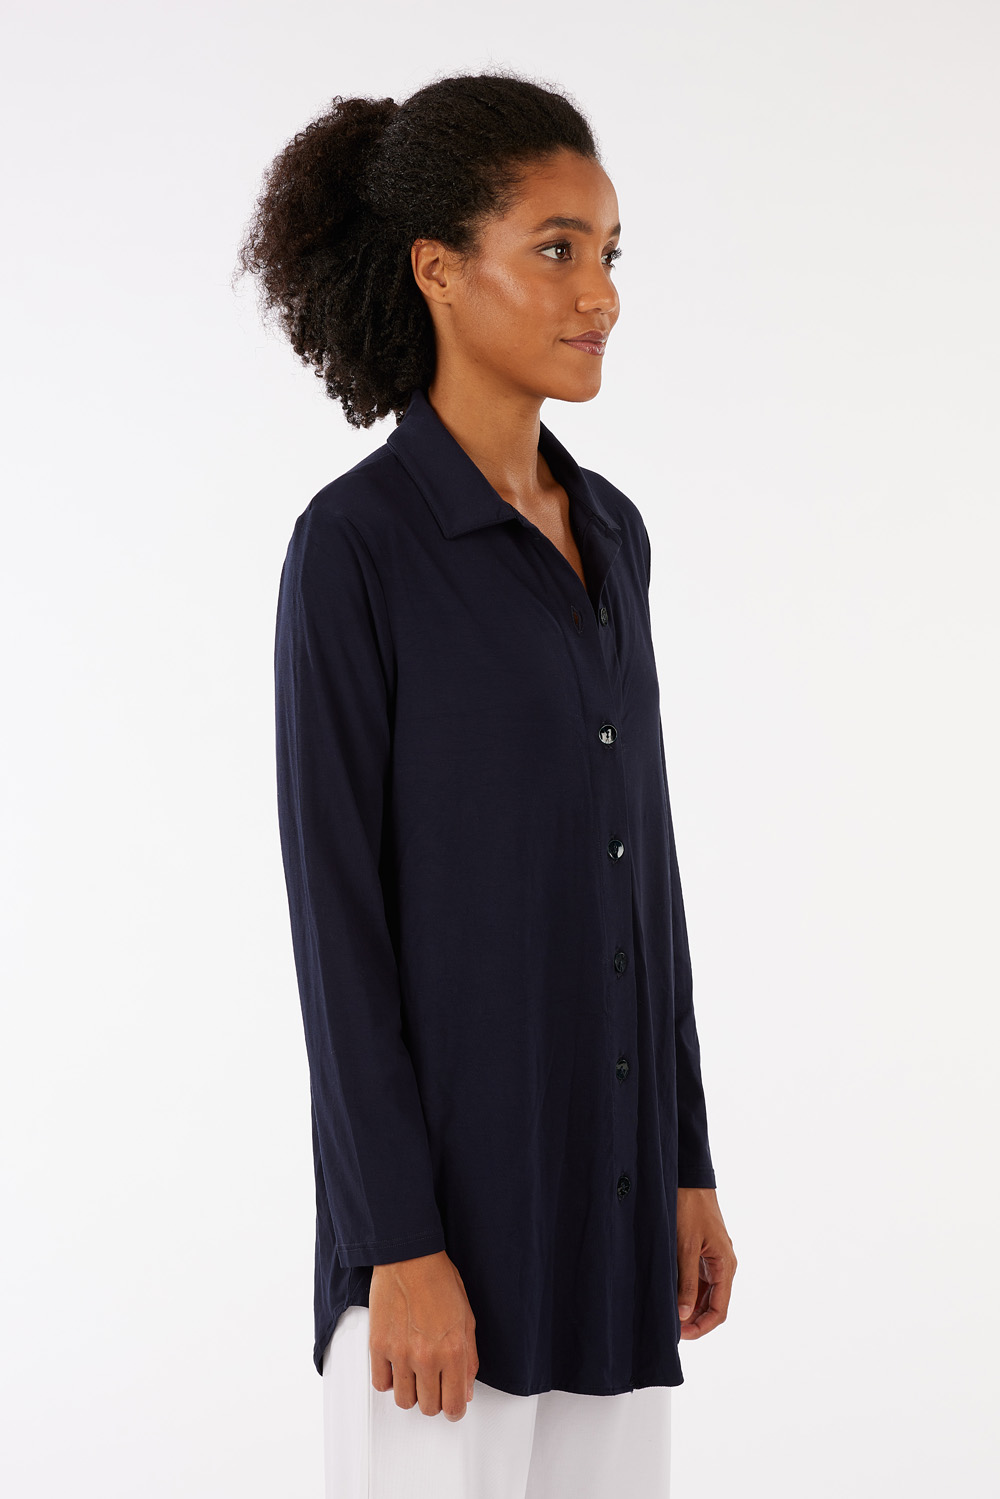 Microfibre jersey shirt, long sleeve with narrow cuff, button fastening, curved hem